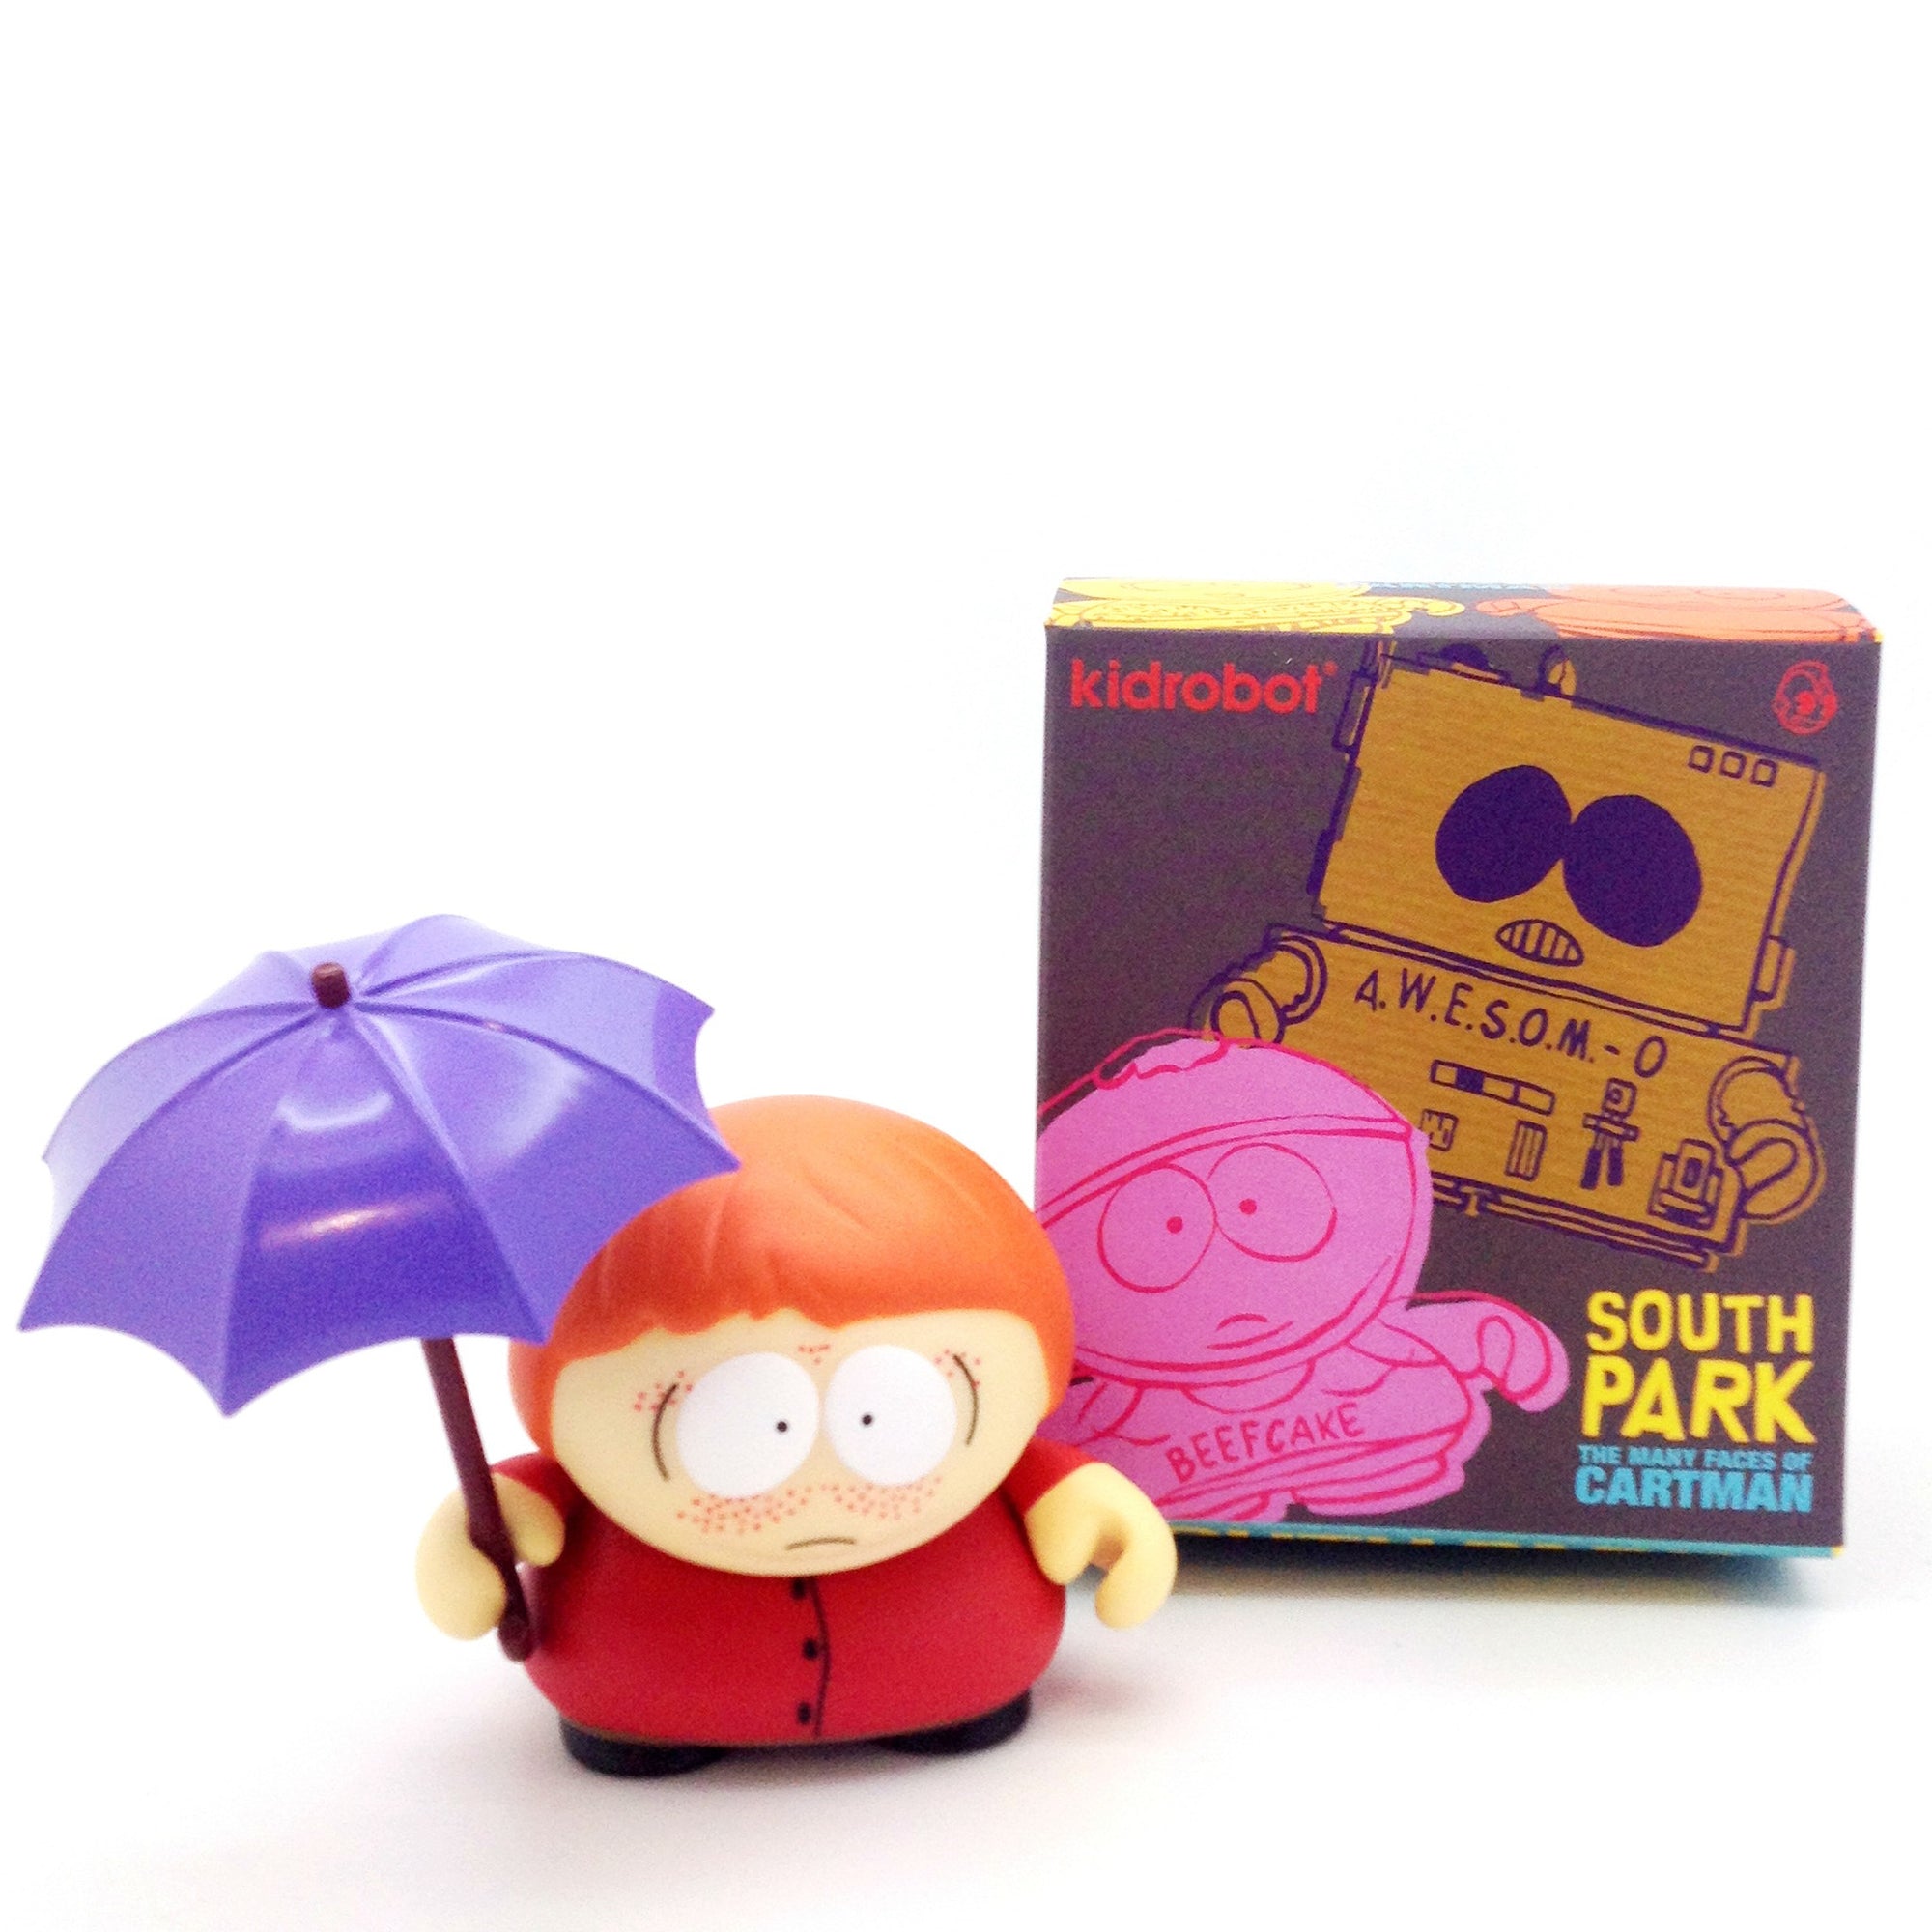 South Park The Many Faces of Cartman x Kidrobot - Gingervitus (Chase) - Mindzai
 - 1